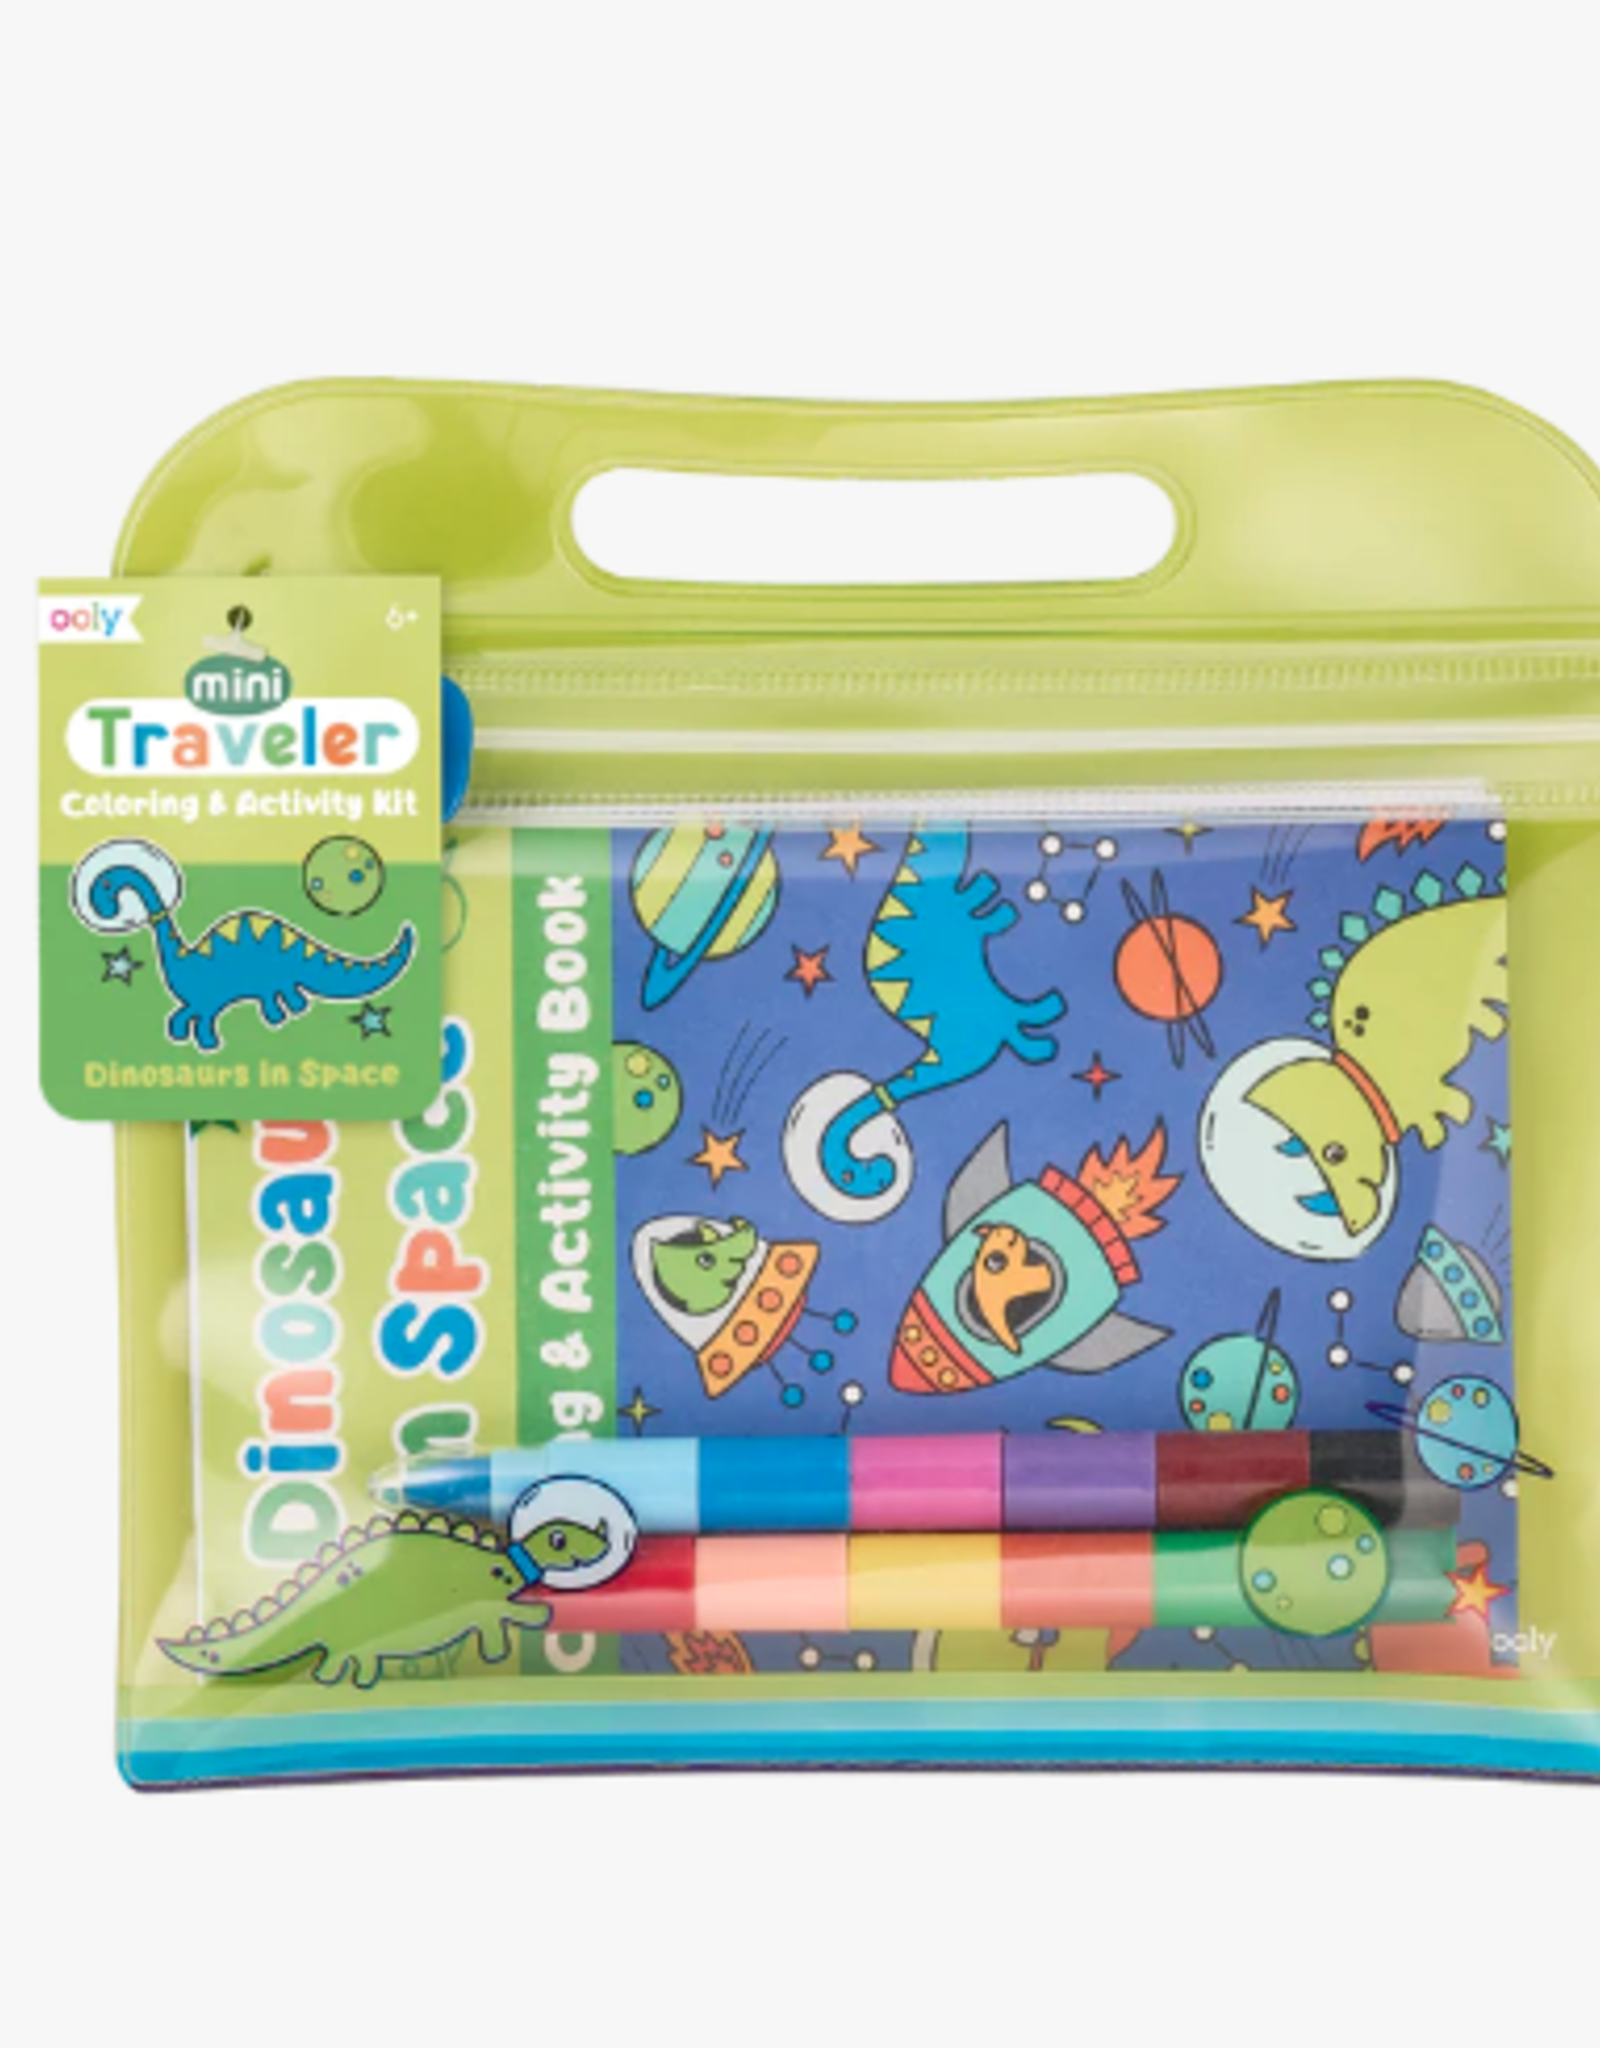 OOLY Mini Traveller Color & Act. Book Dino in Space